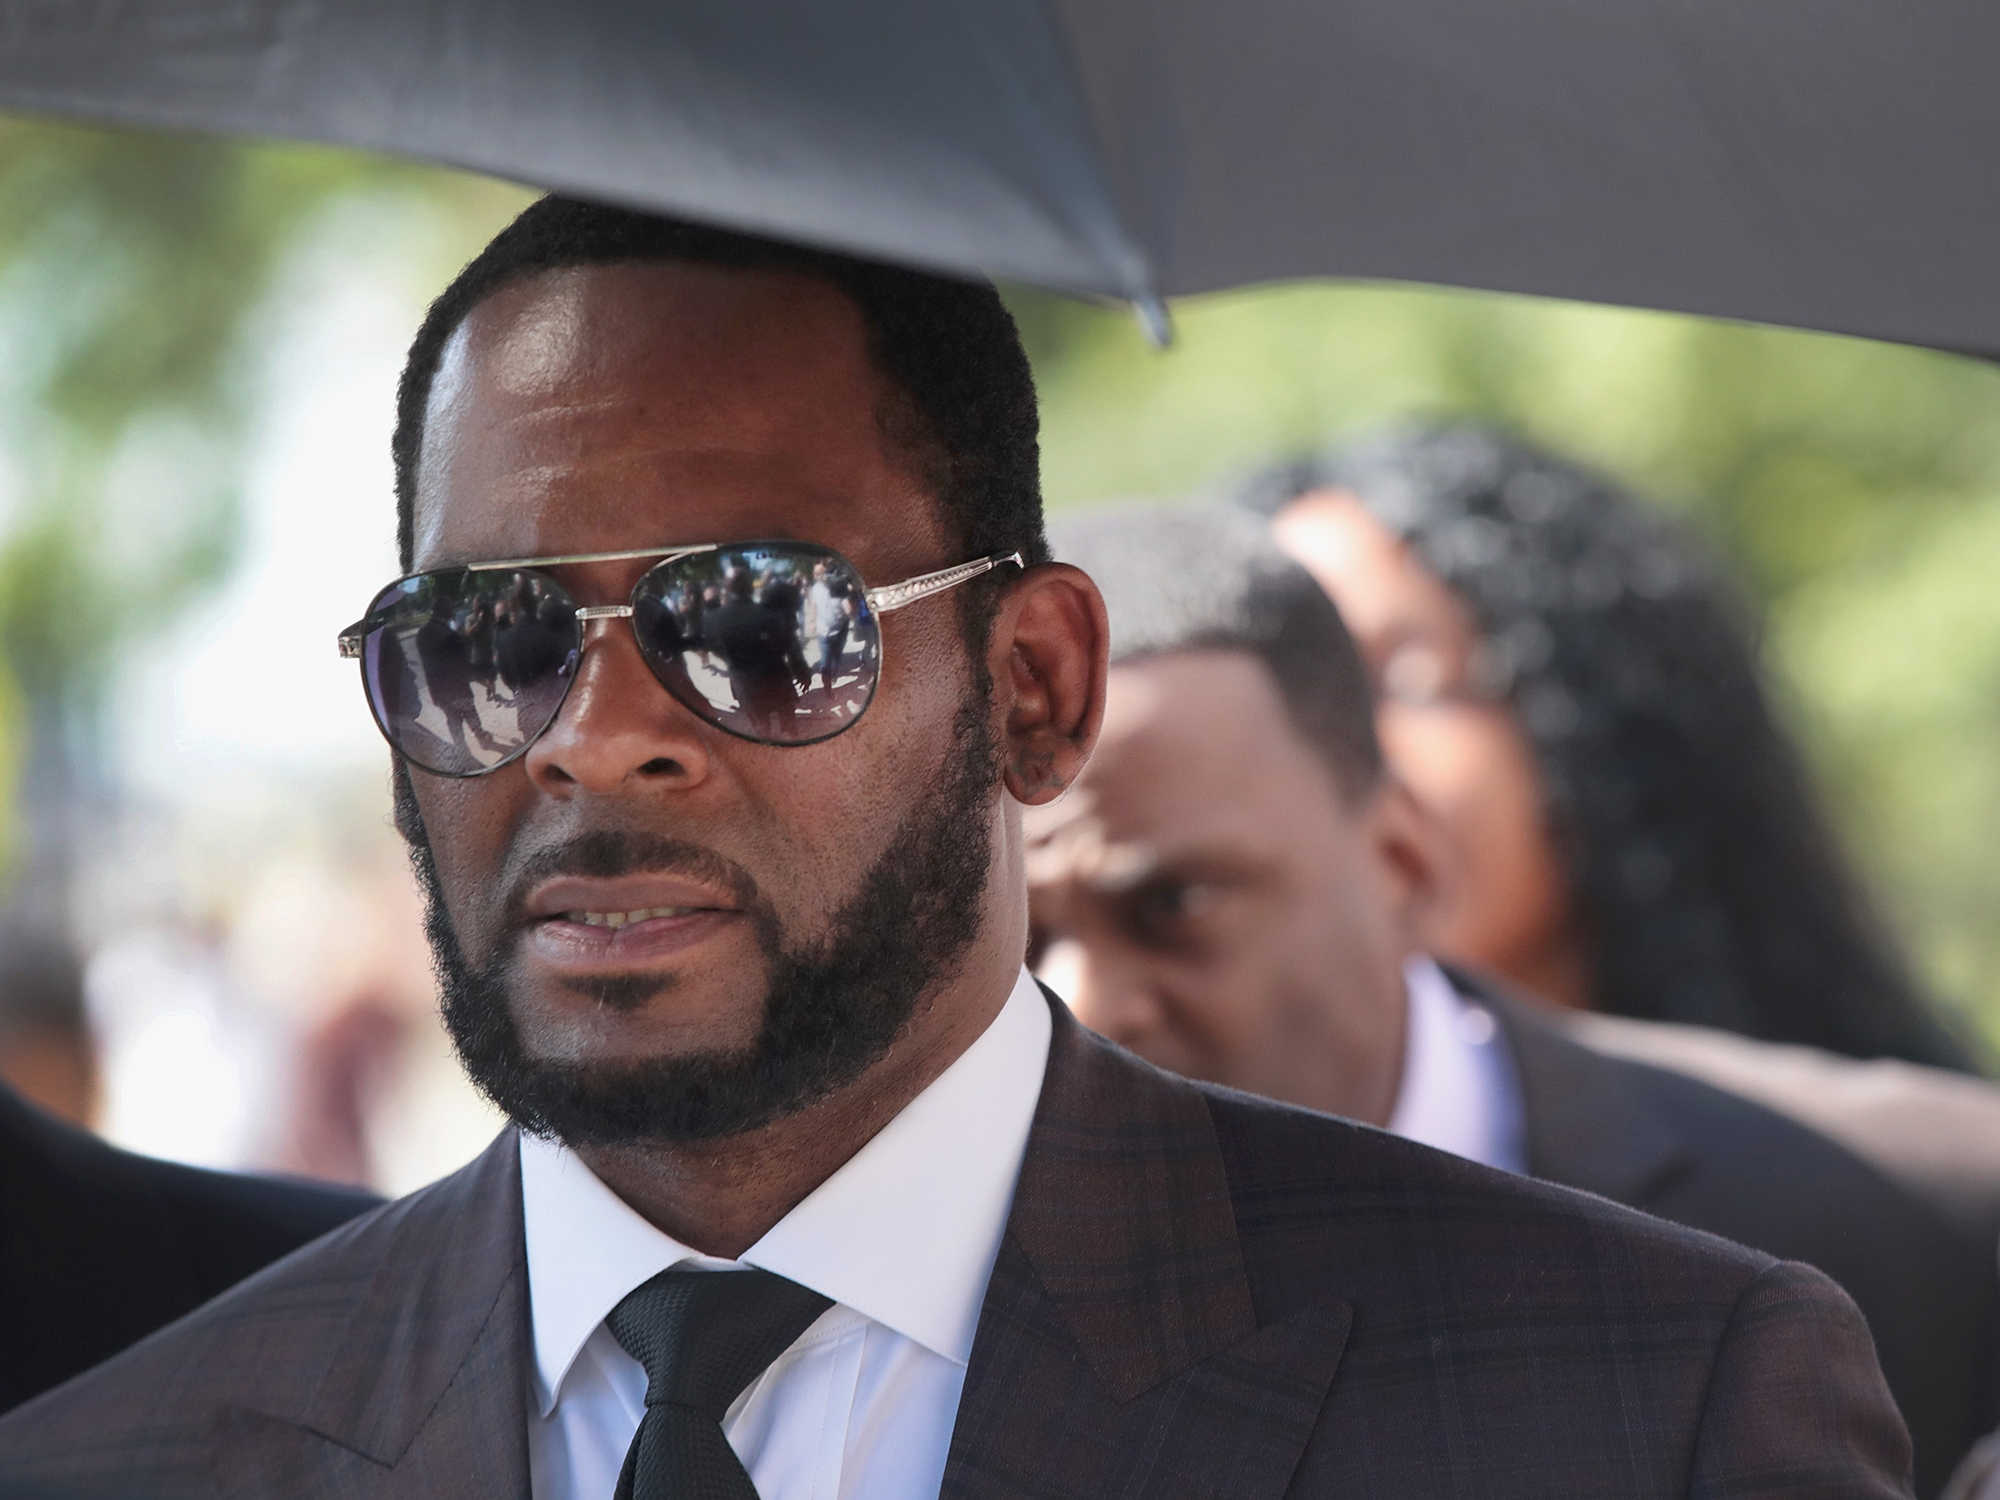 Blazers Kidnapper X X X - R. Kelly Indicted in New York Over Alleged Sex With Girls - Bloomberg